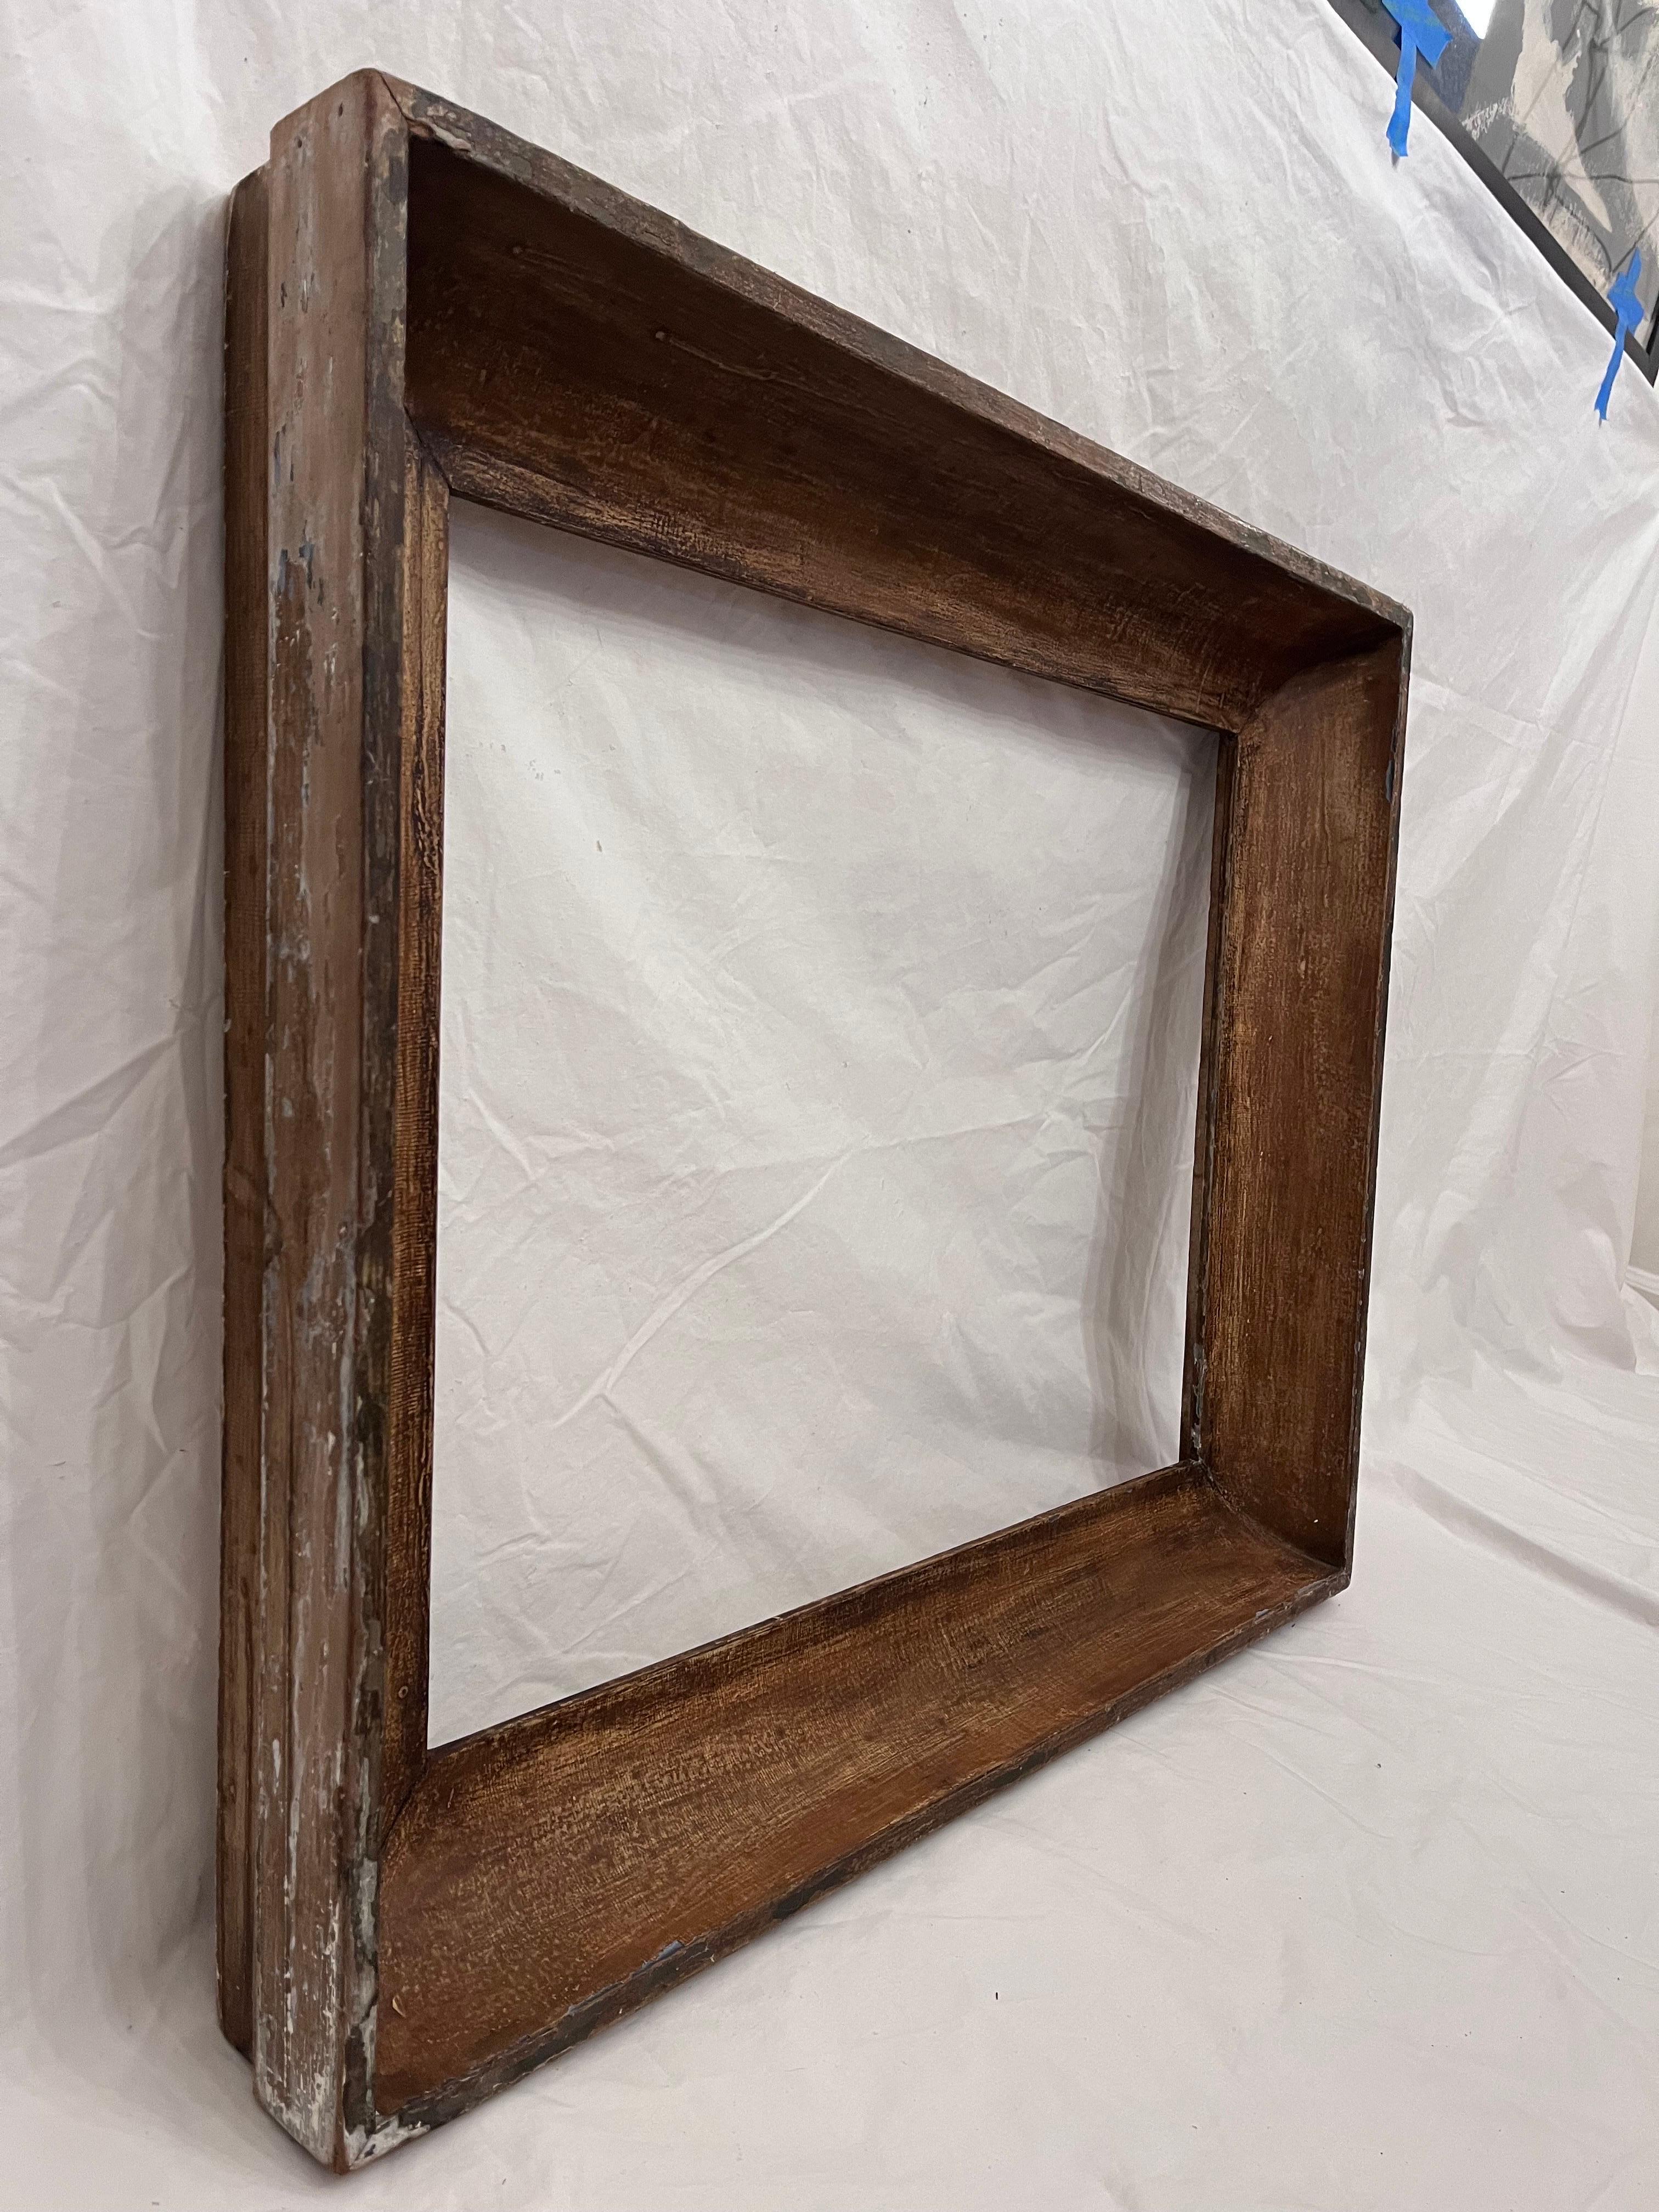 A beautiful and antique / vintage early to mid 20th century circa 1930's American Modernist style paint and scratch incised finished picture frame. The rabbet size (size that holds the art) is 26.25